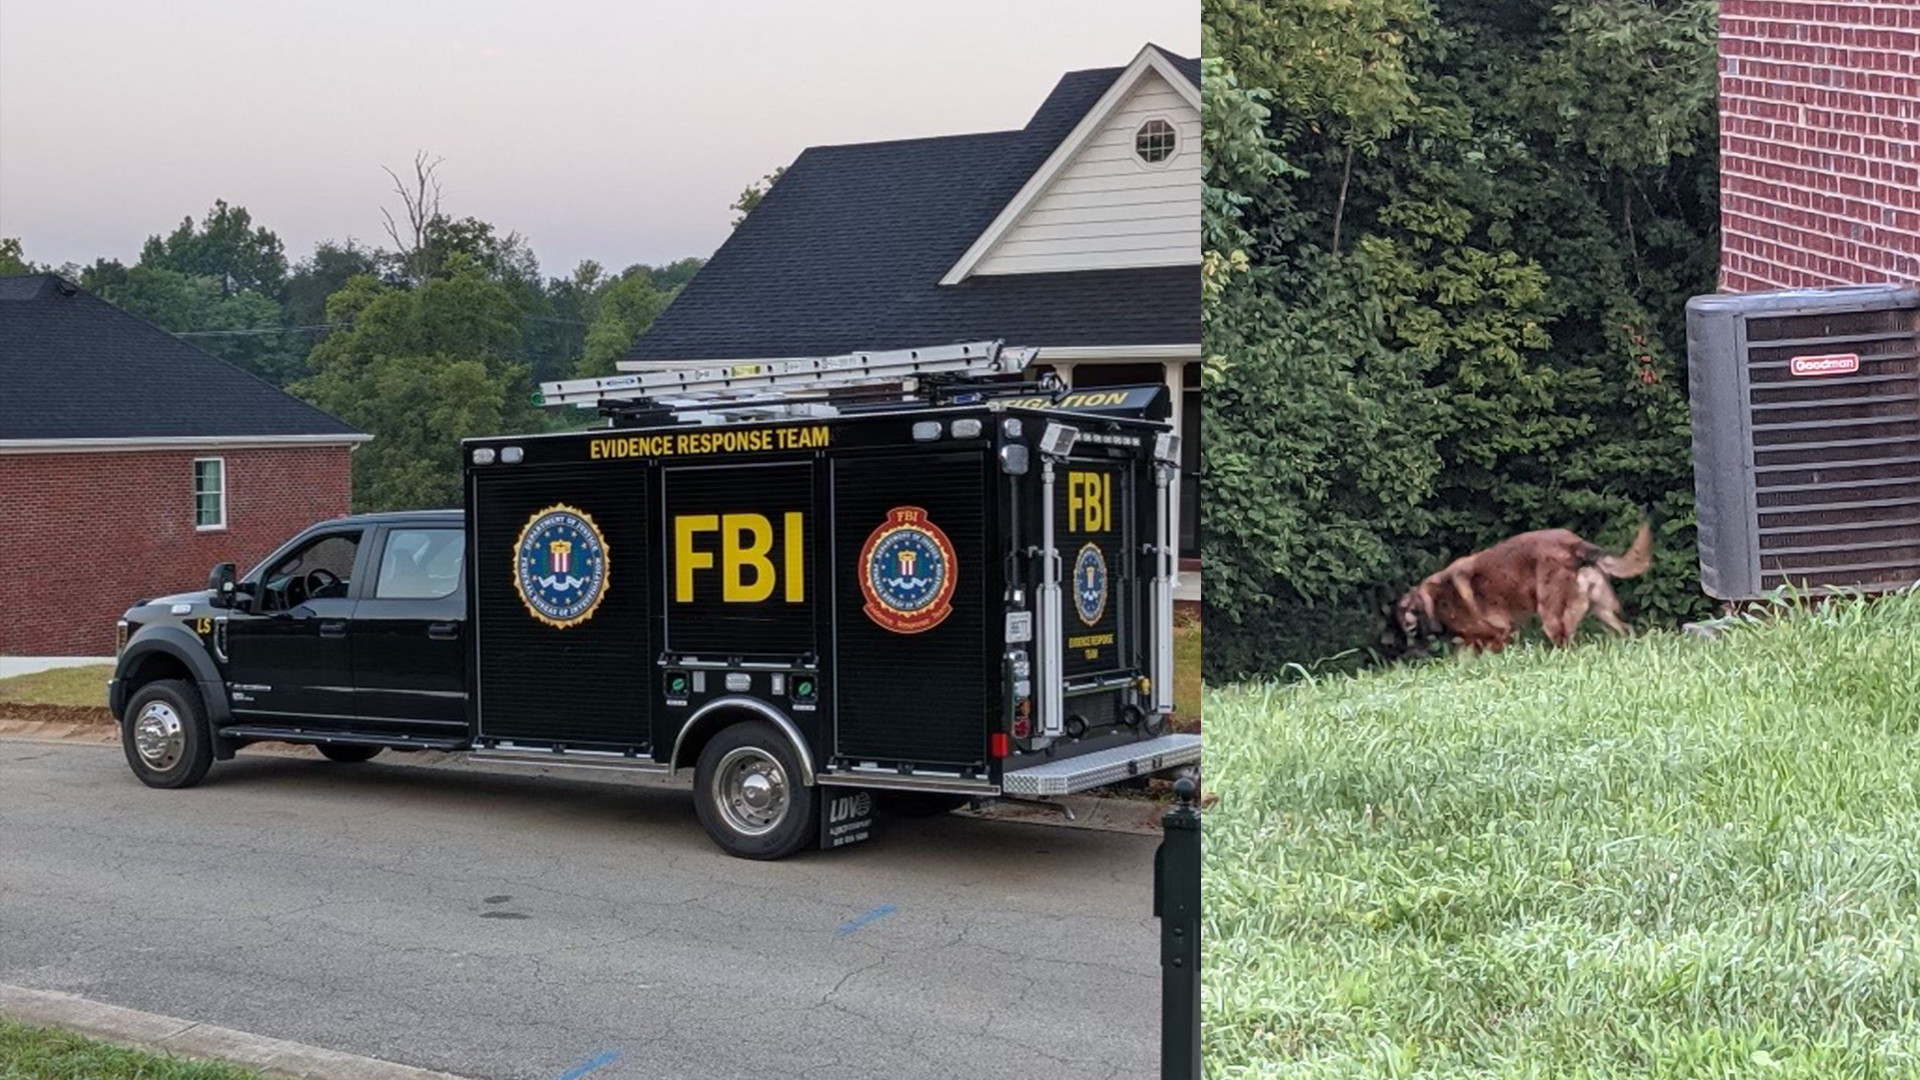 Officials said on Monday they items are "potentially relevant" to the investigation into the disappearance of Rogers. The items have been sent to a lab for testing.